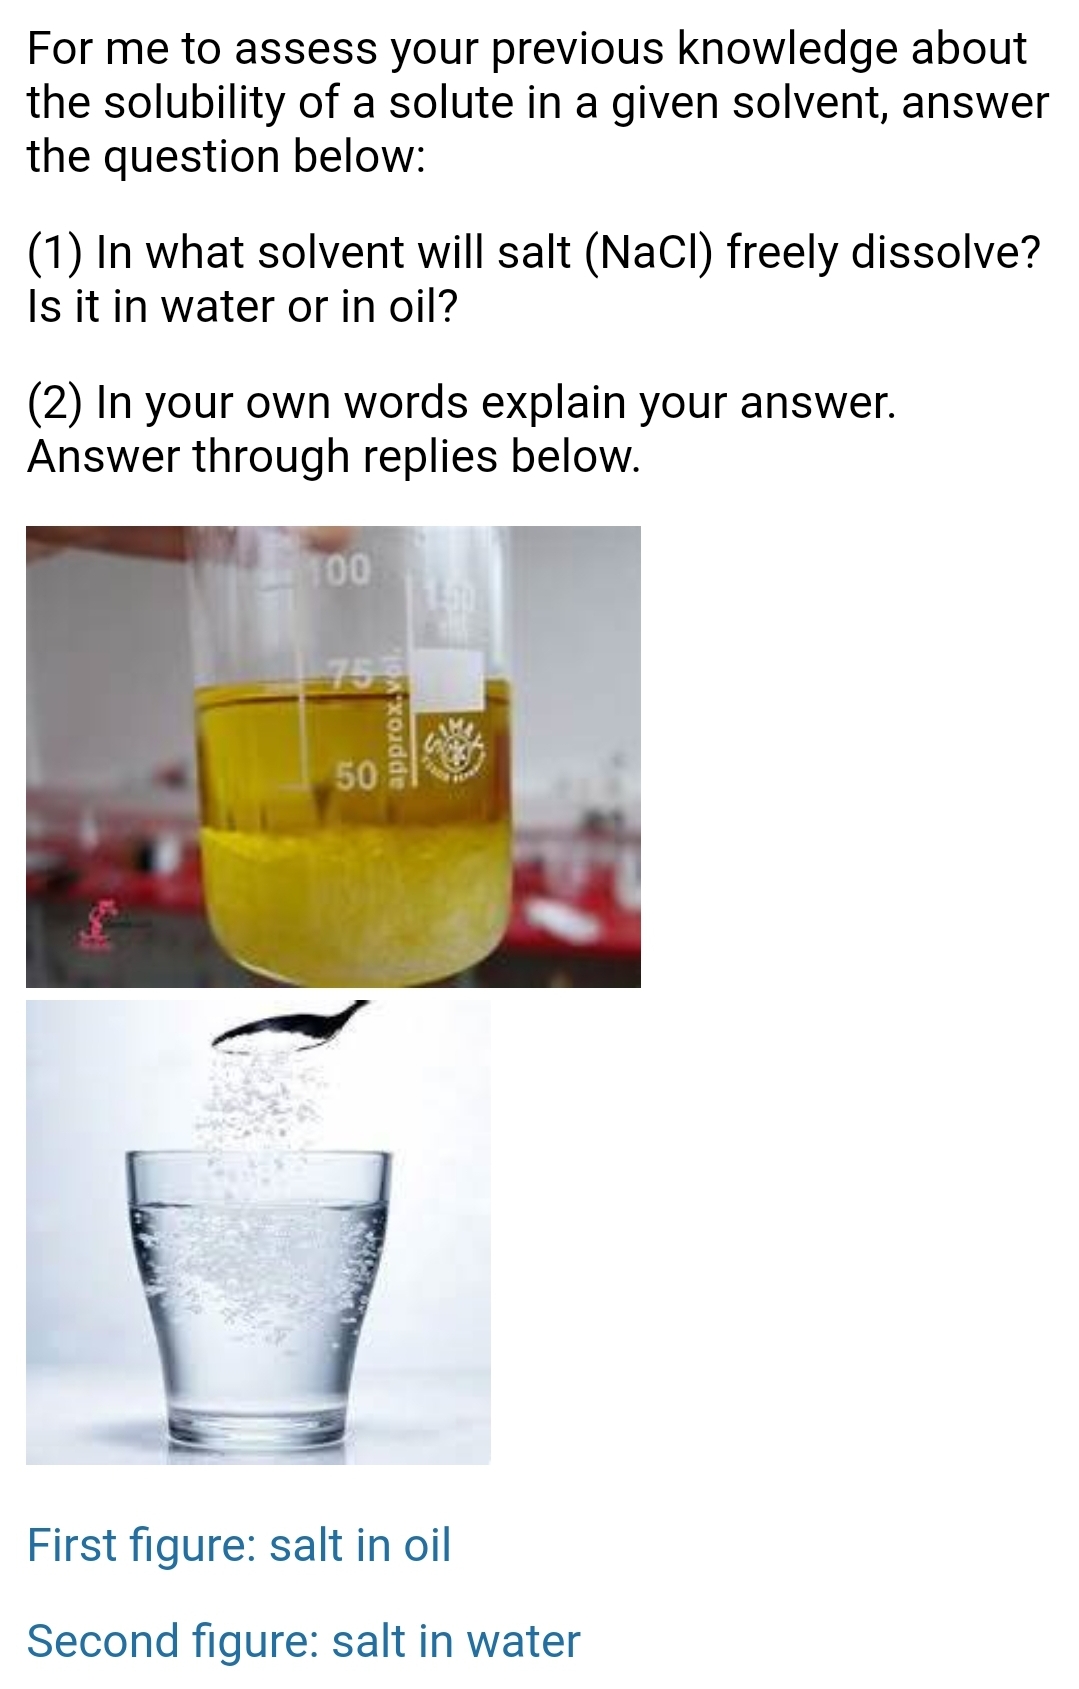 For me to assess your previous knowledge about
the solubility of a solute in a given solvent, answer
the question below:
(1) In what solvent will salt (NaCl) freely dissolve?
Is it in water or in oil?
(2) In your own words explain your answer.
Answer through replies below.
100
755
50
First figure: salt in oil
Second figure: salt in water
approx.vol
